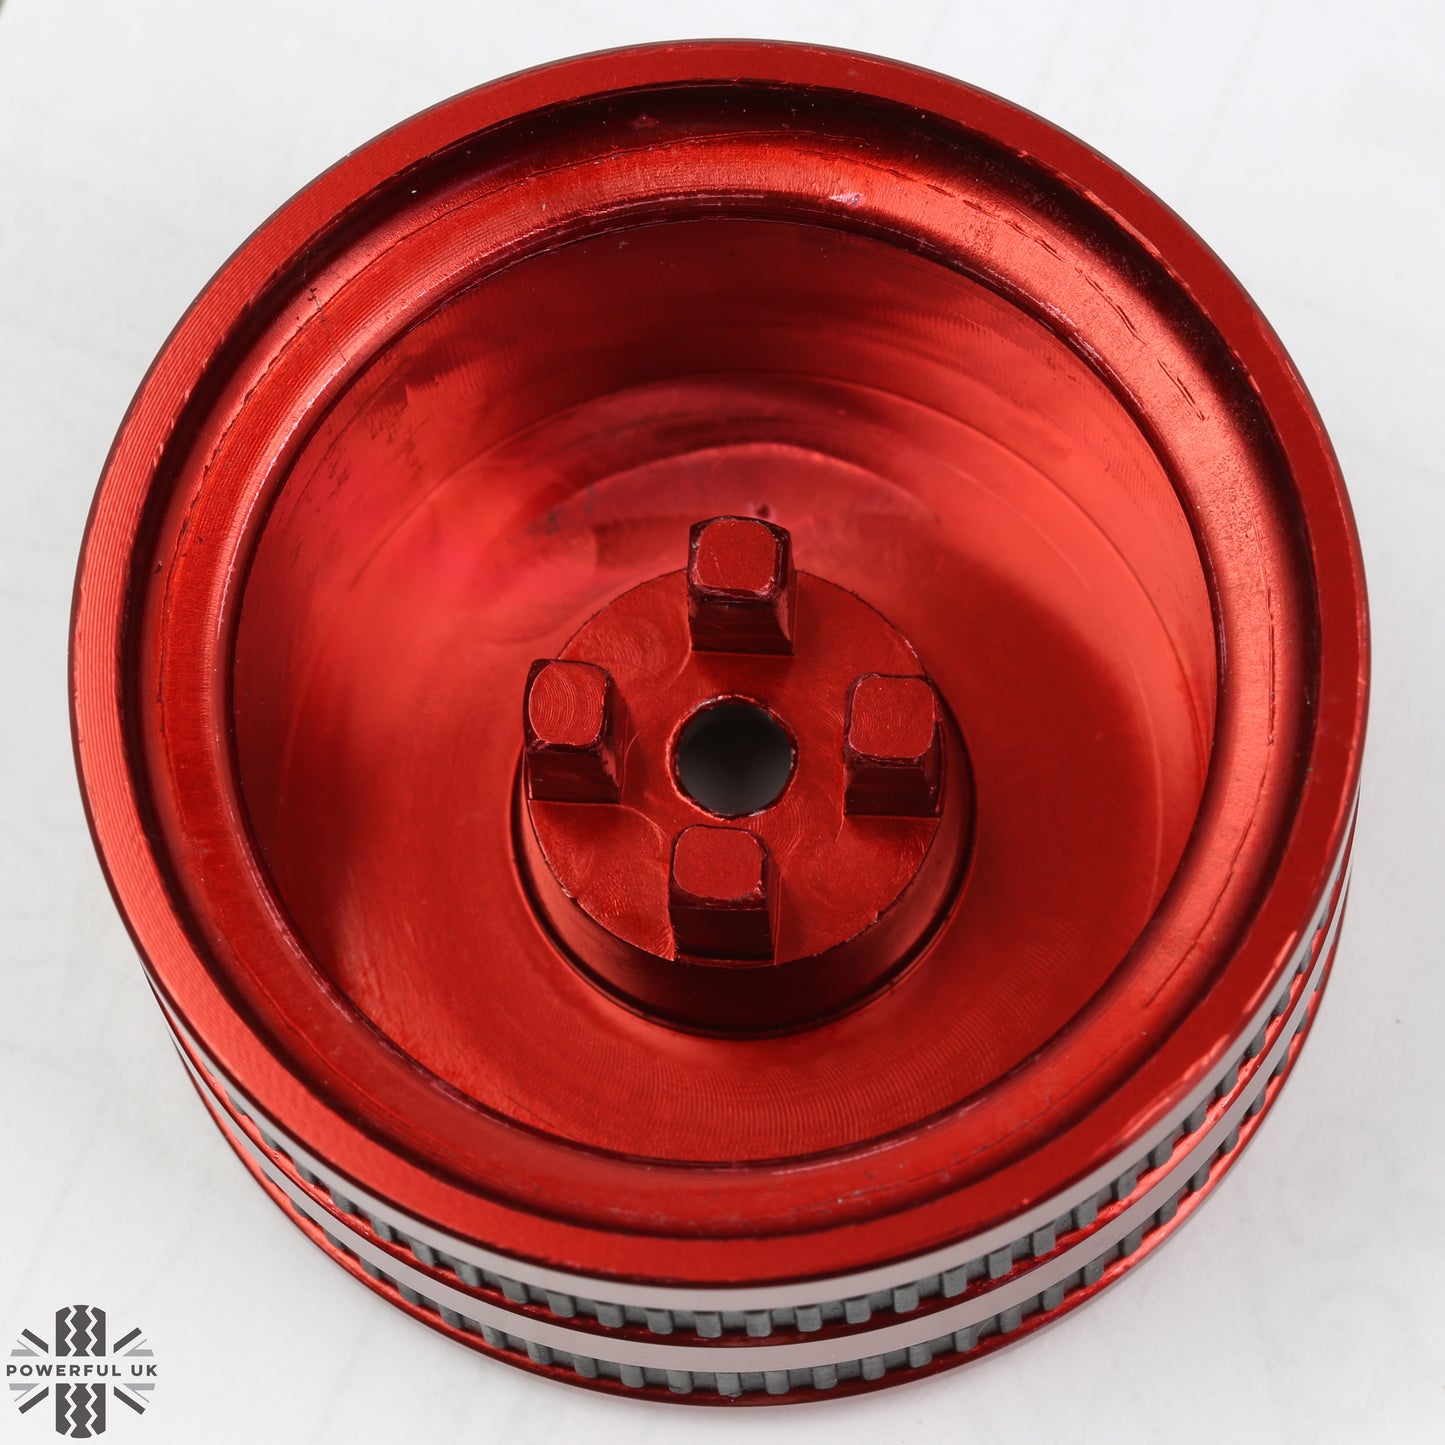 Rotary Shifter in Red with Leather Topper (Type 1) - Genuine - for Land Rover Discovery Sport (2014-19)